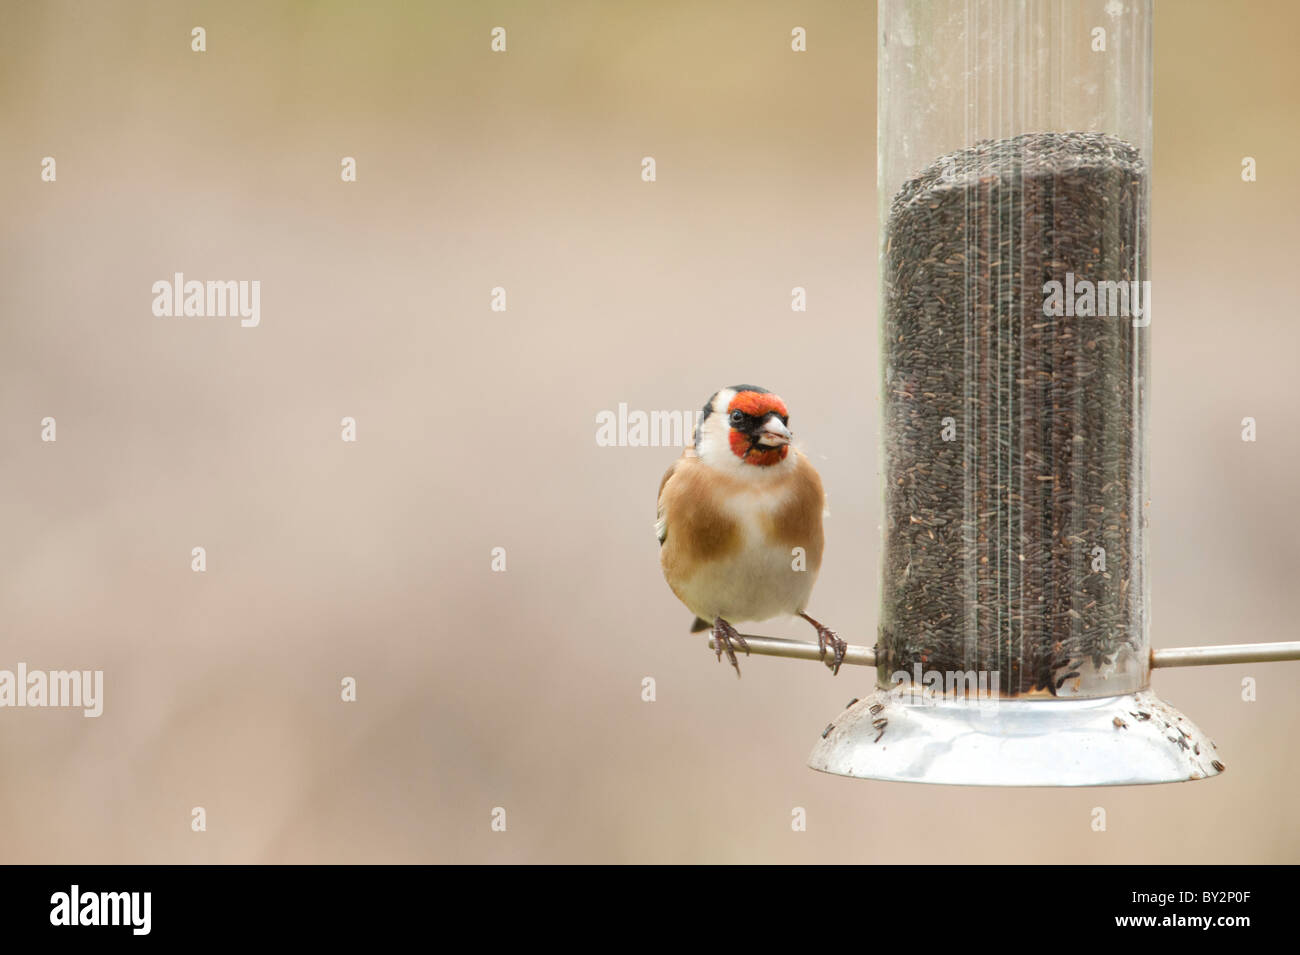 Goldfinch perched on garden nyger seed feeder Stock Photo